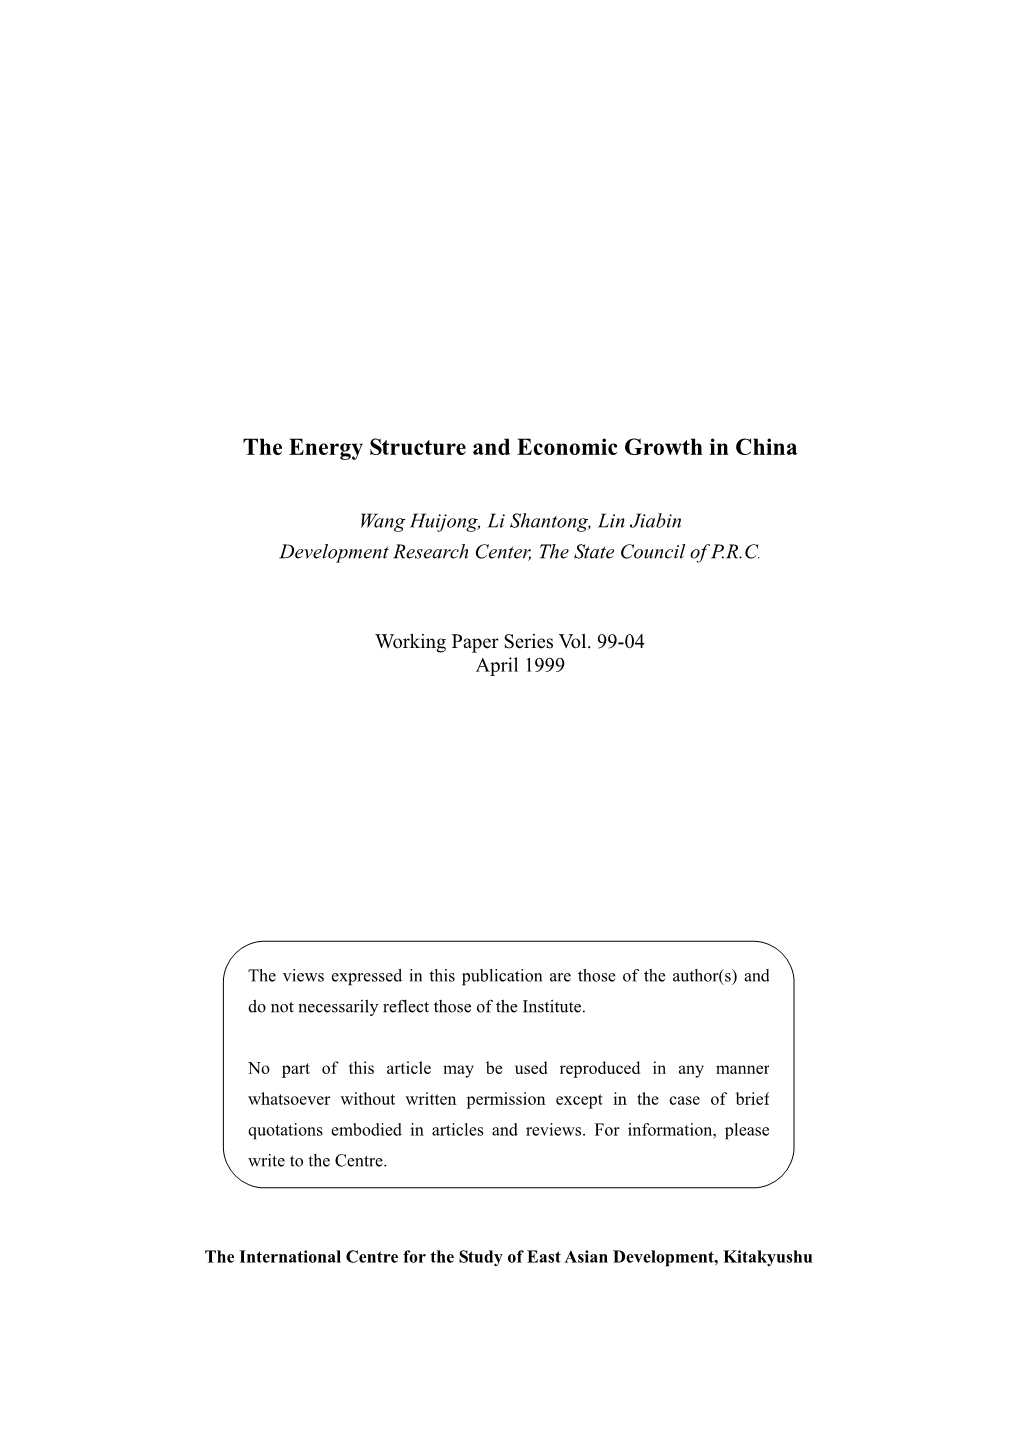 The Energy Structure and Economic Growth in China